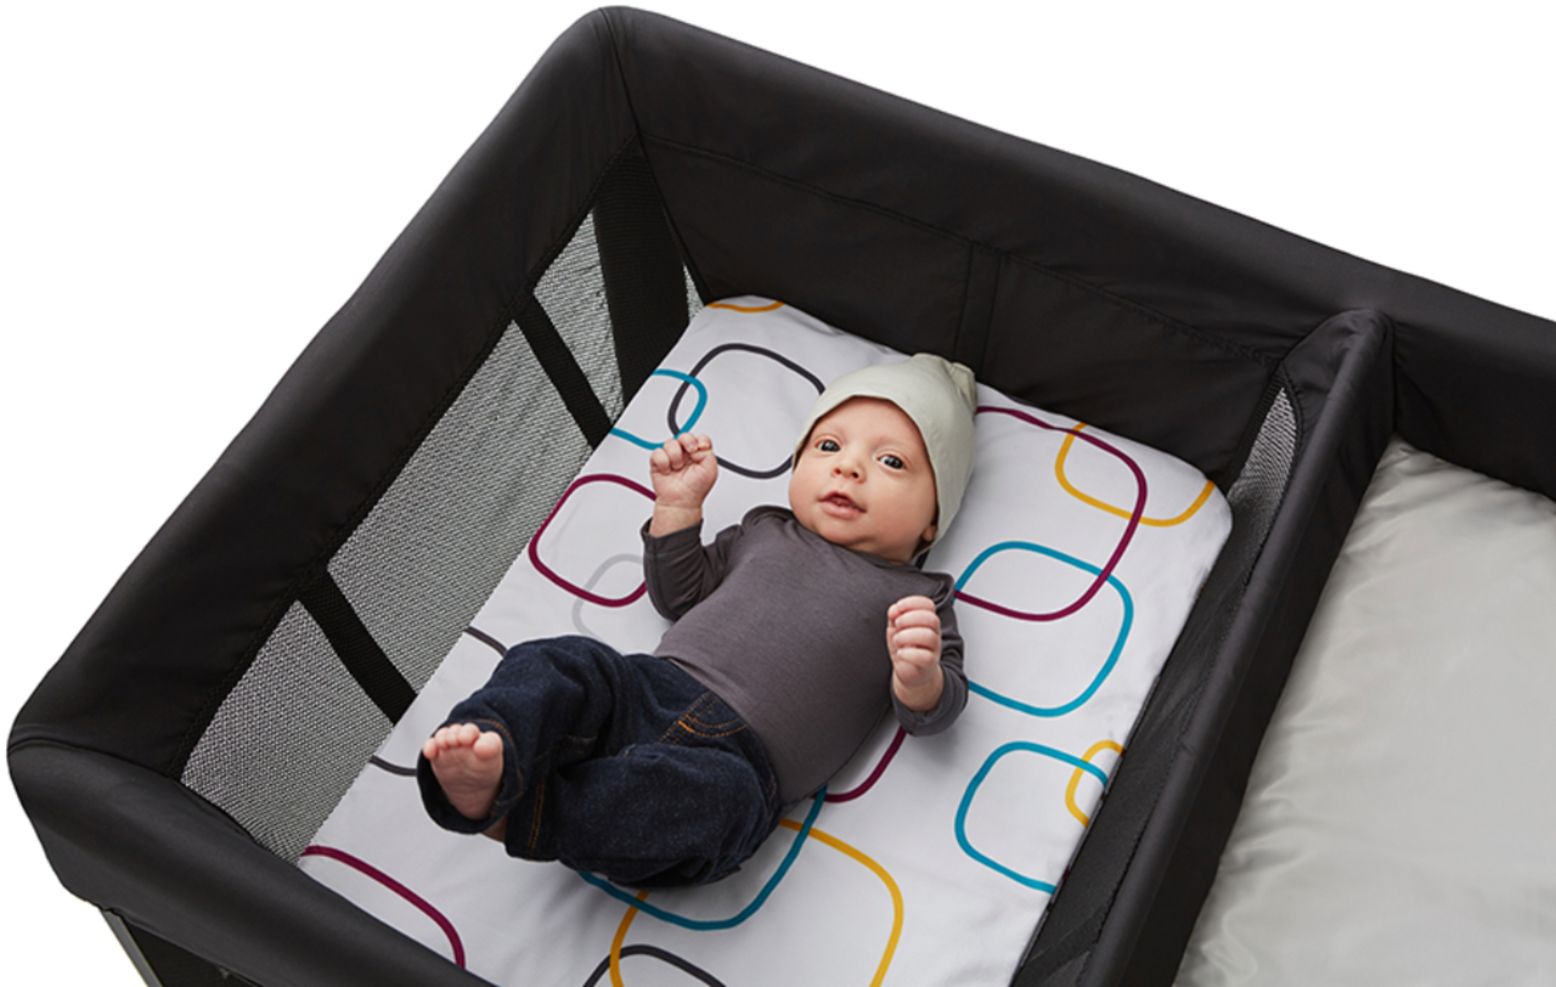 4moms breeze plus portable playard with removable bassinet and changing station